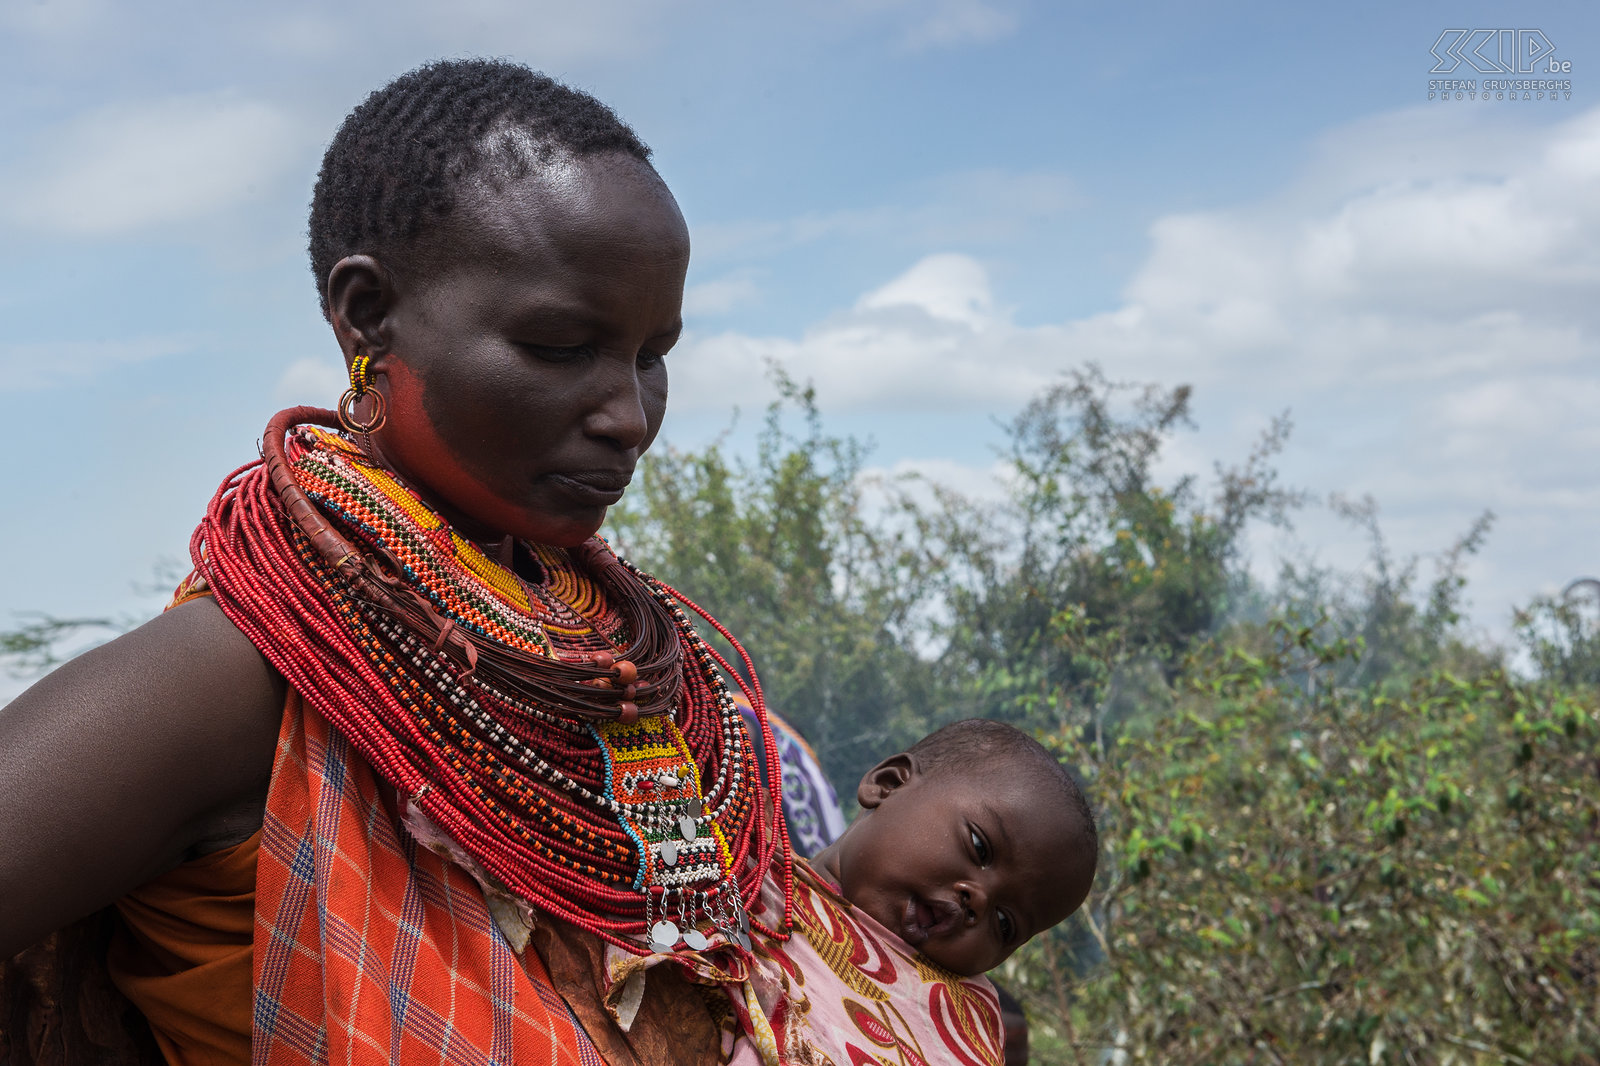 Kisima - Samburu lmuget - Woman with baby Mothers carry their babies in colorful cotton cloth tied round their waists or slung on their backs. Stefan Cruysberghs